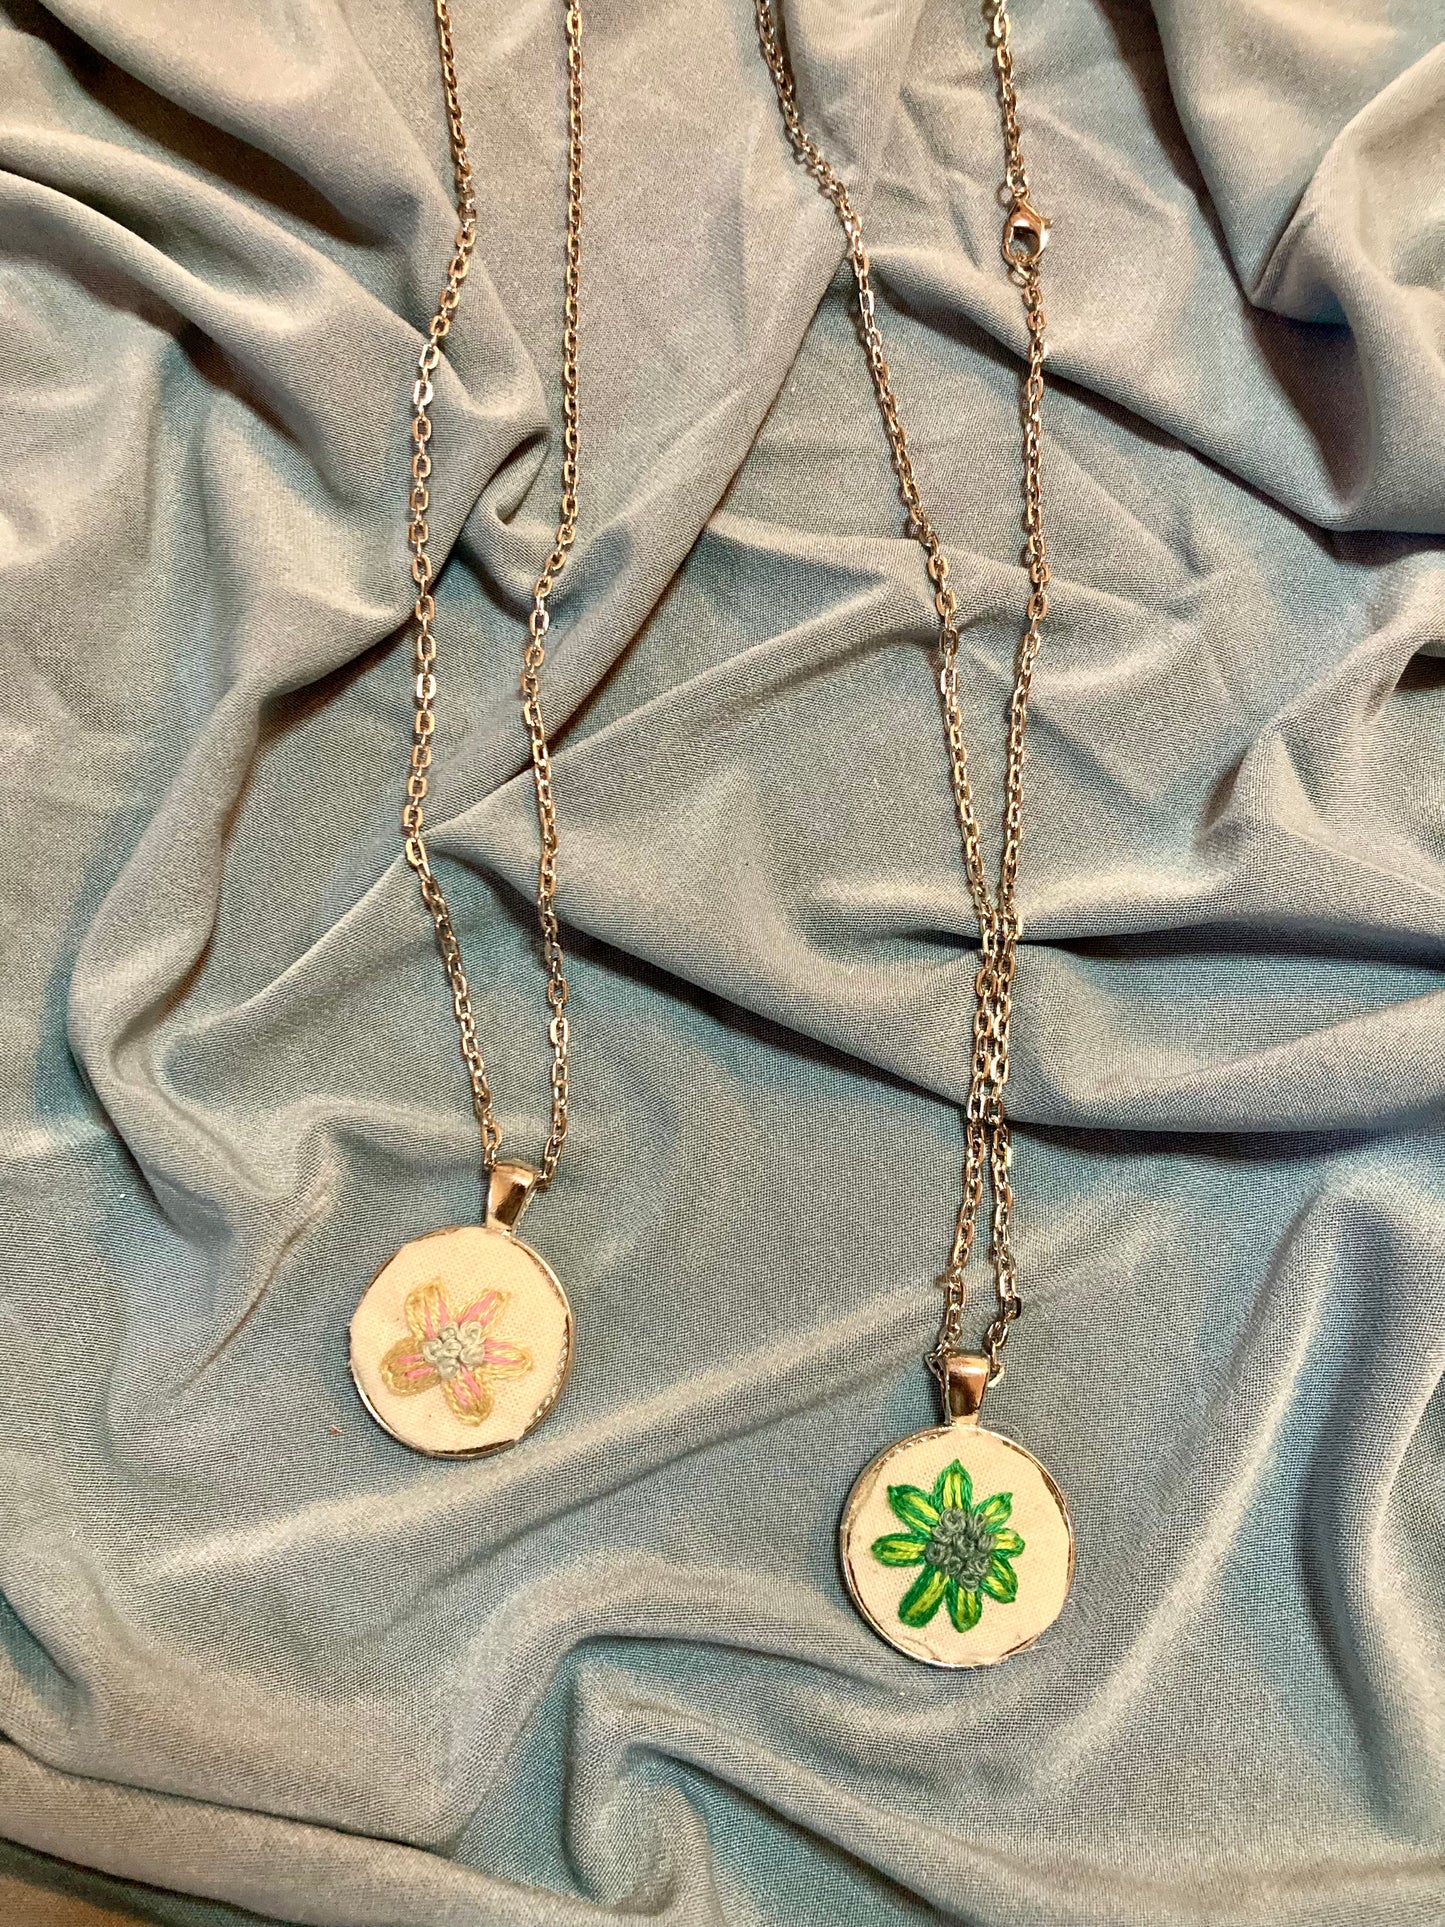 The flower bud necklace